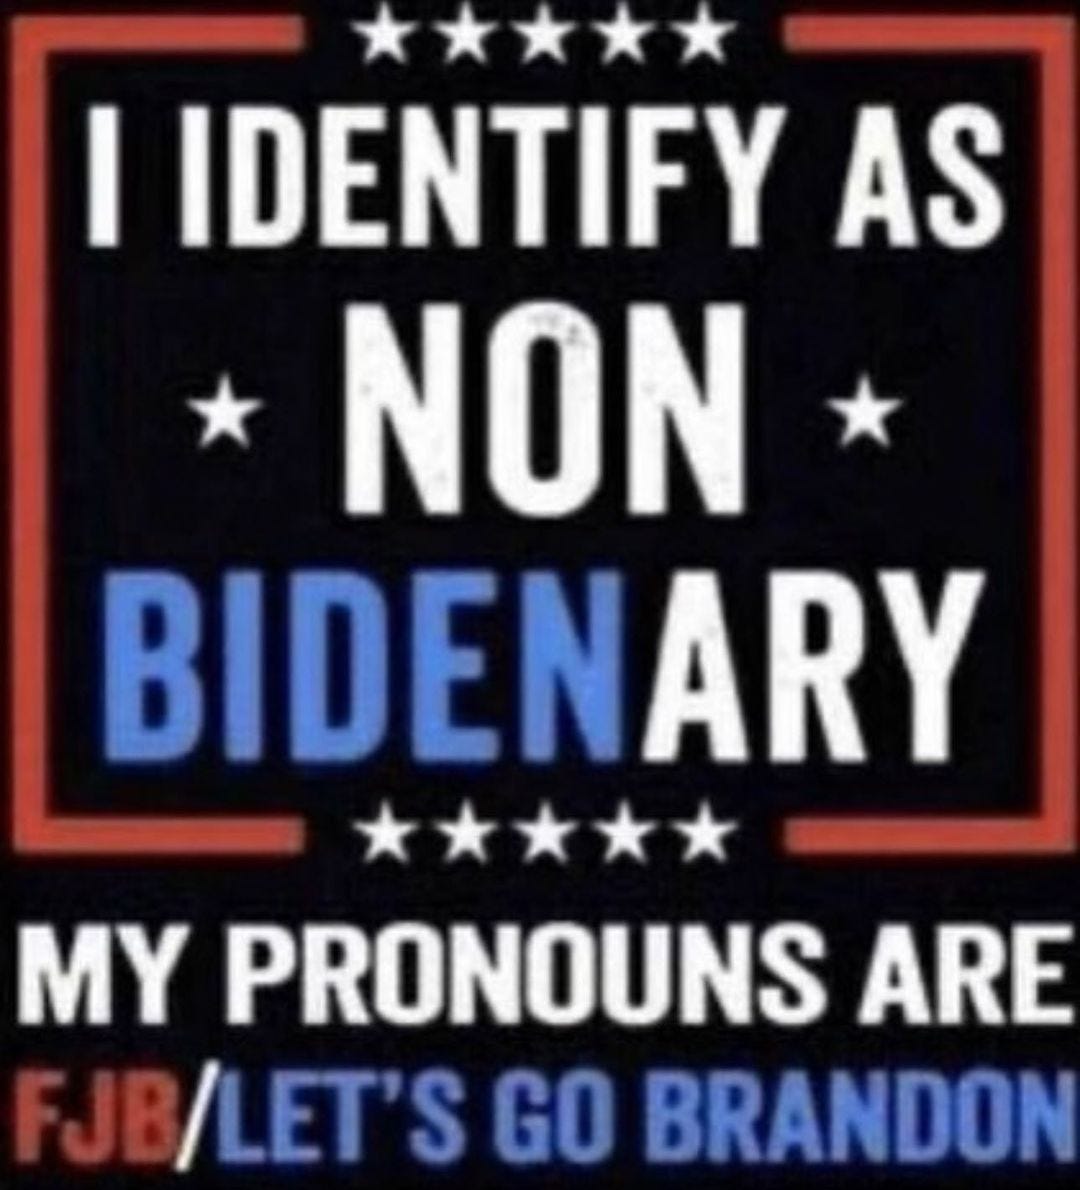 May be an image of one or more people and text that says 'I IDENTIFY AS NON BIDENARY MY PRONOUNS ARE JB/LET'S GO BRANDON'